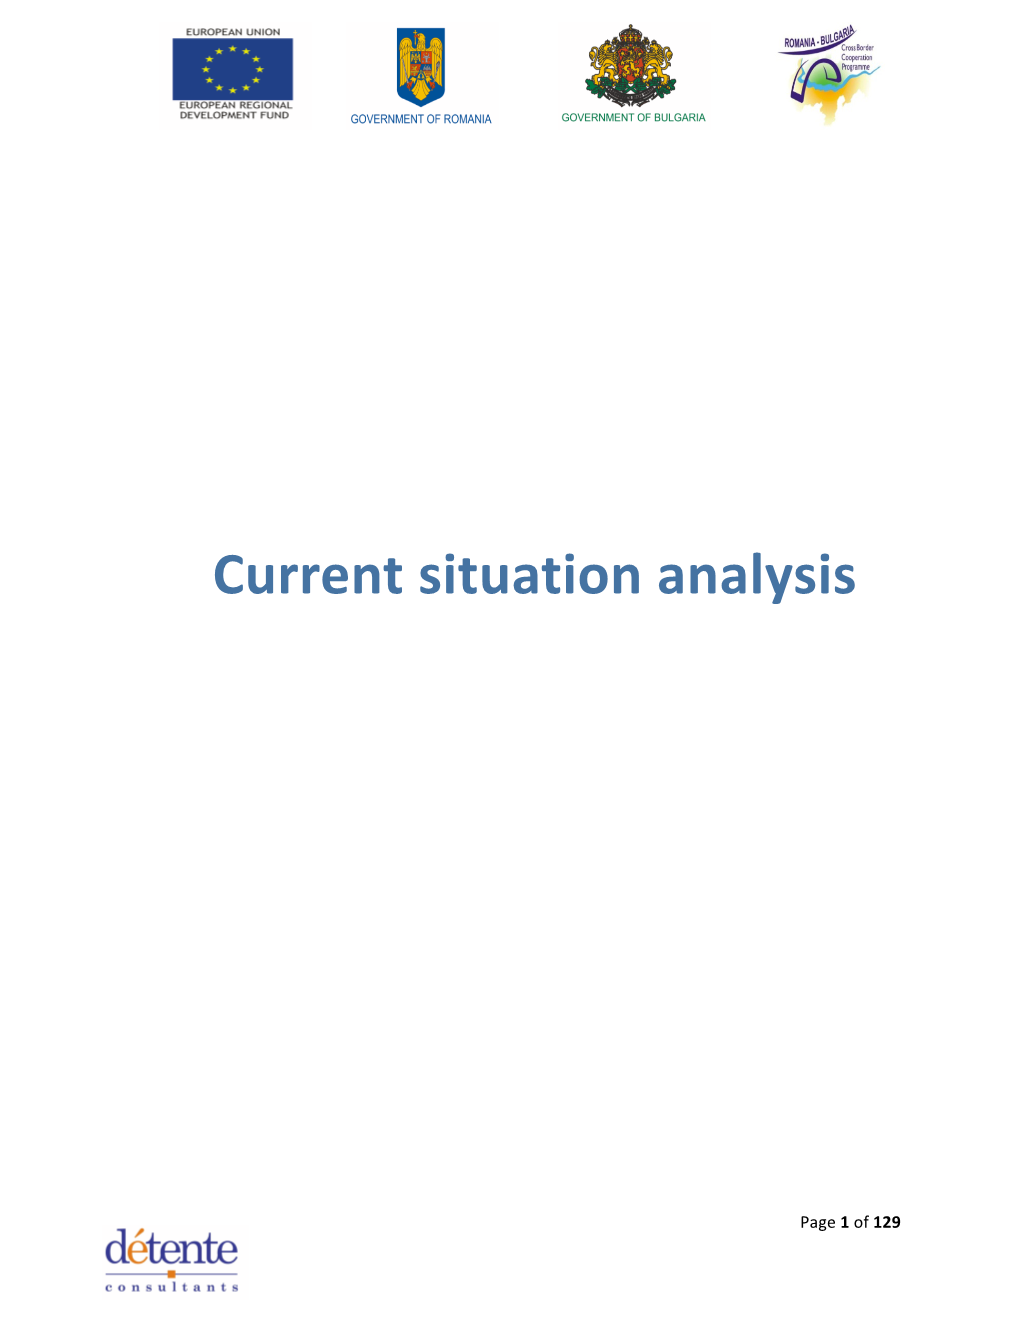 Current Situation Analysis